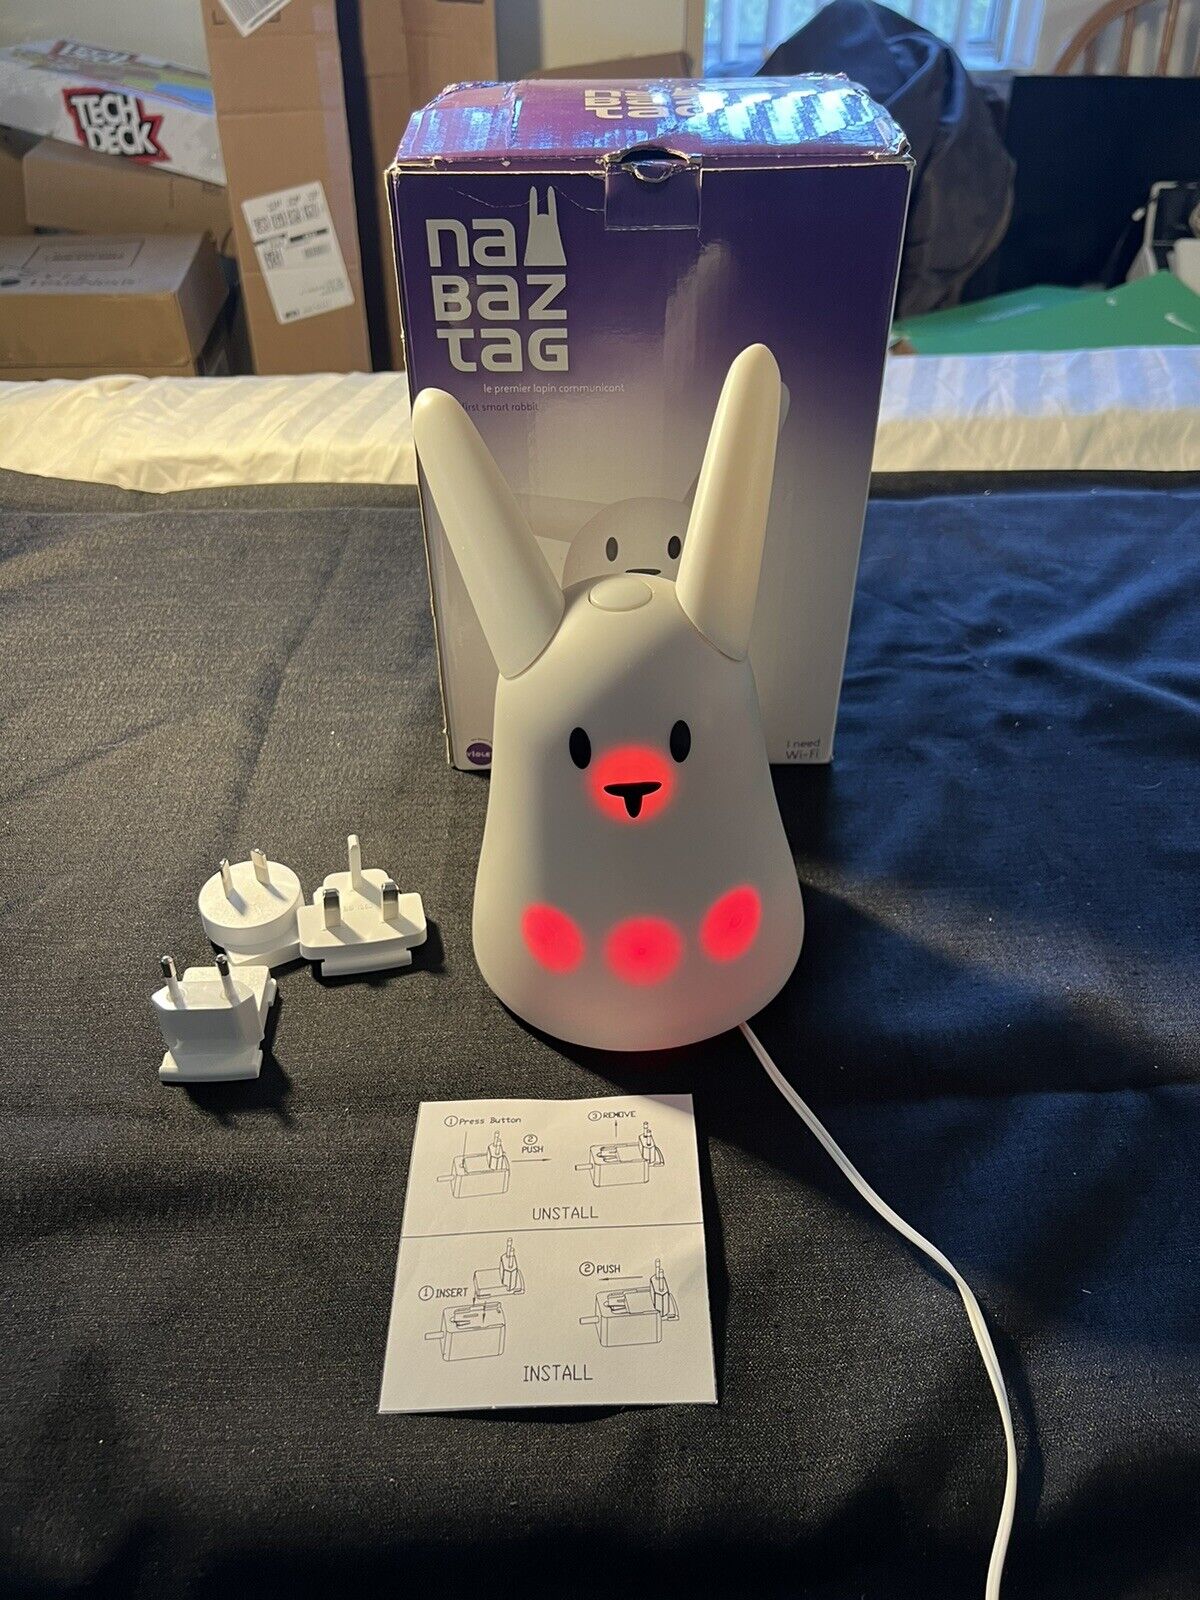 Rare NABAZTAG Smart Rabbit Violet First Generation IOT device with original box